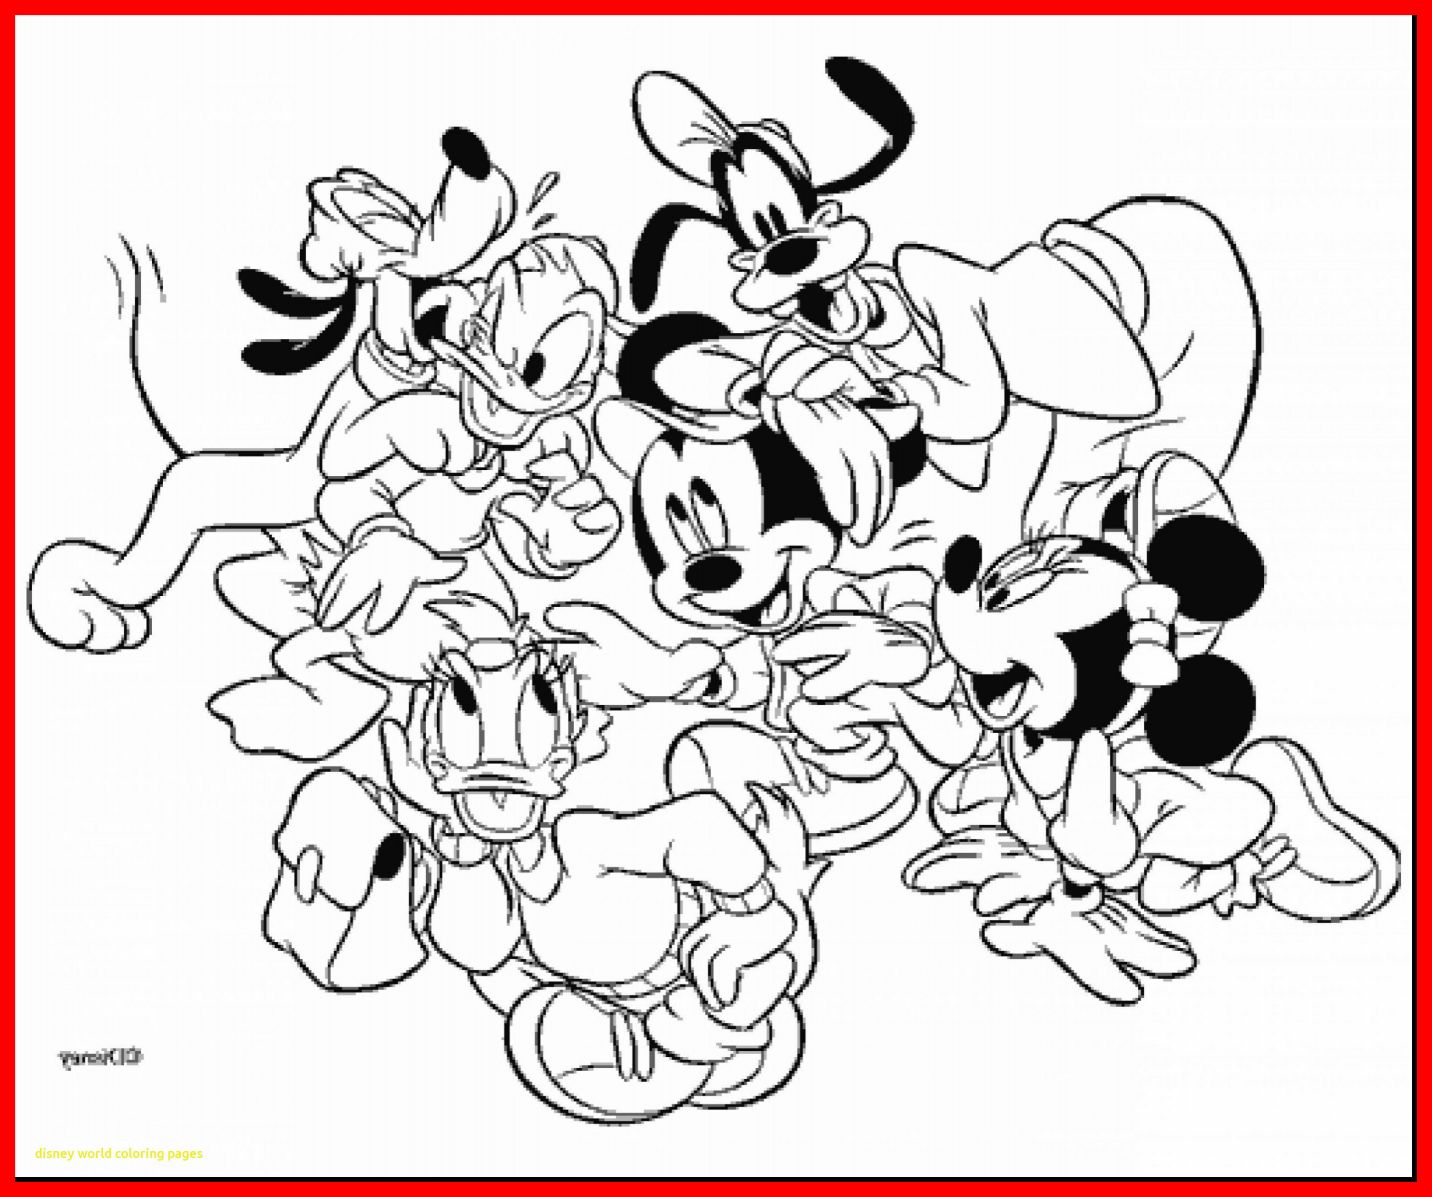 Walt Disney World Coloring Pages at GetDrawings | Free ...